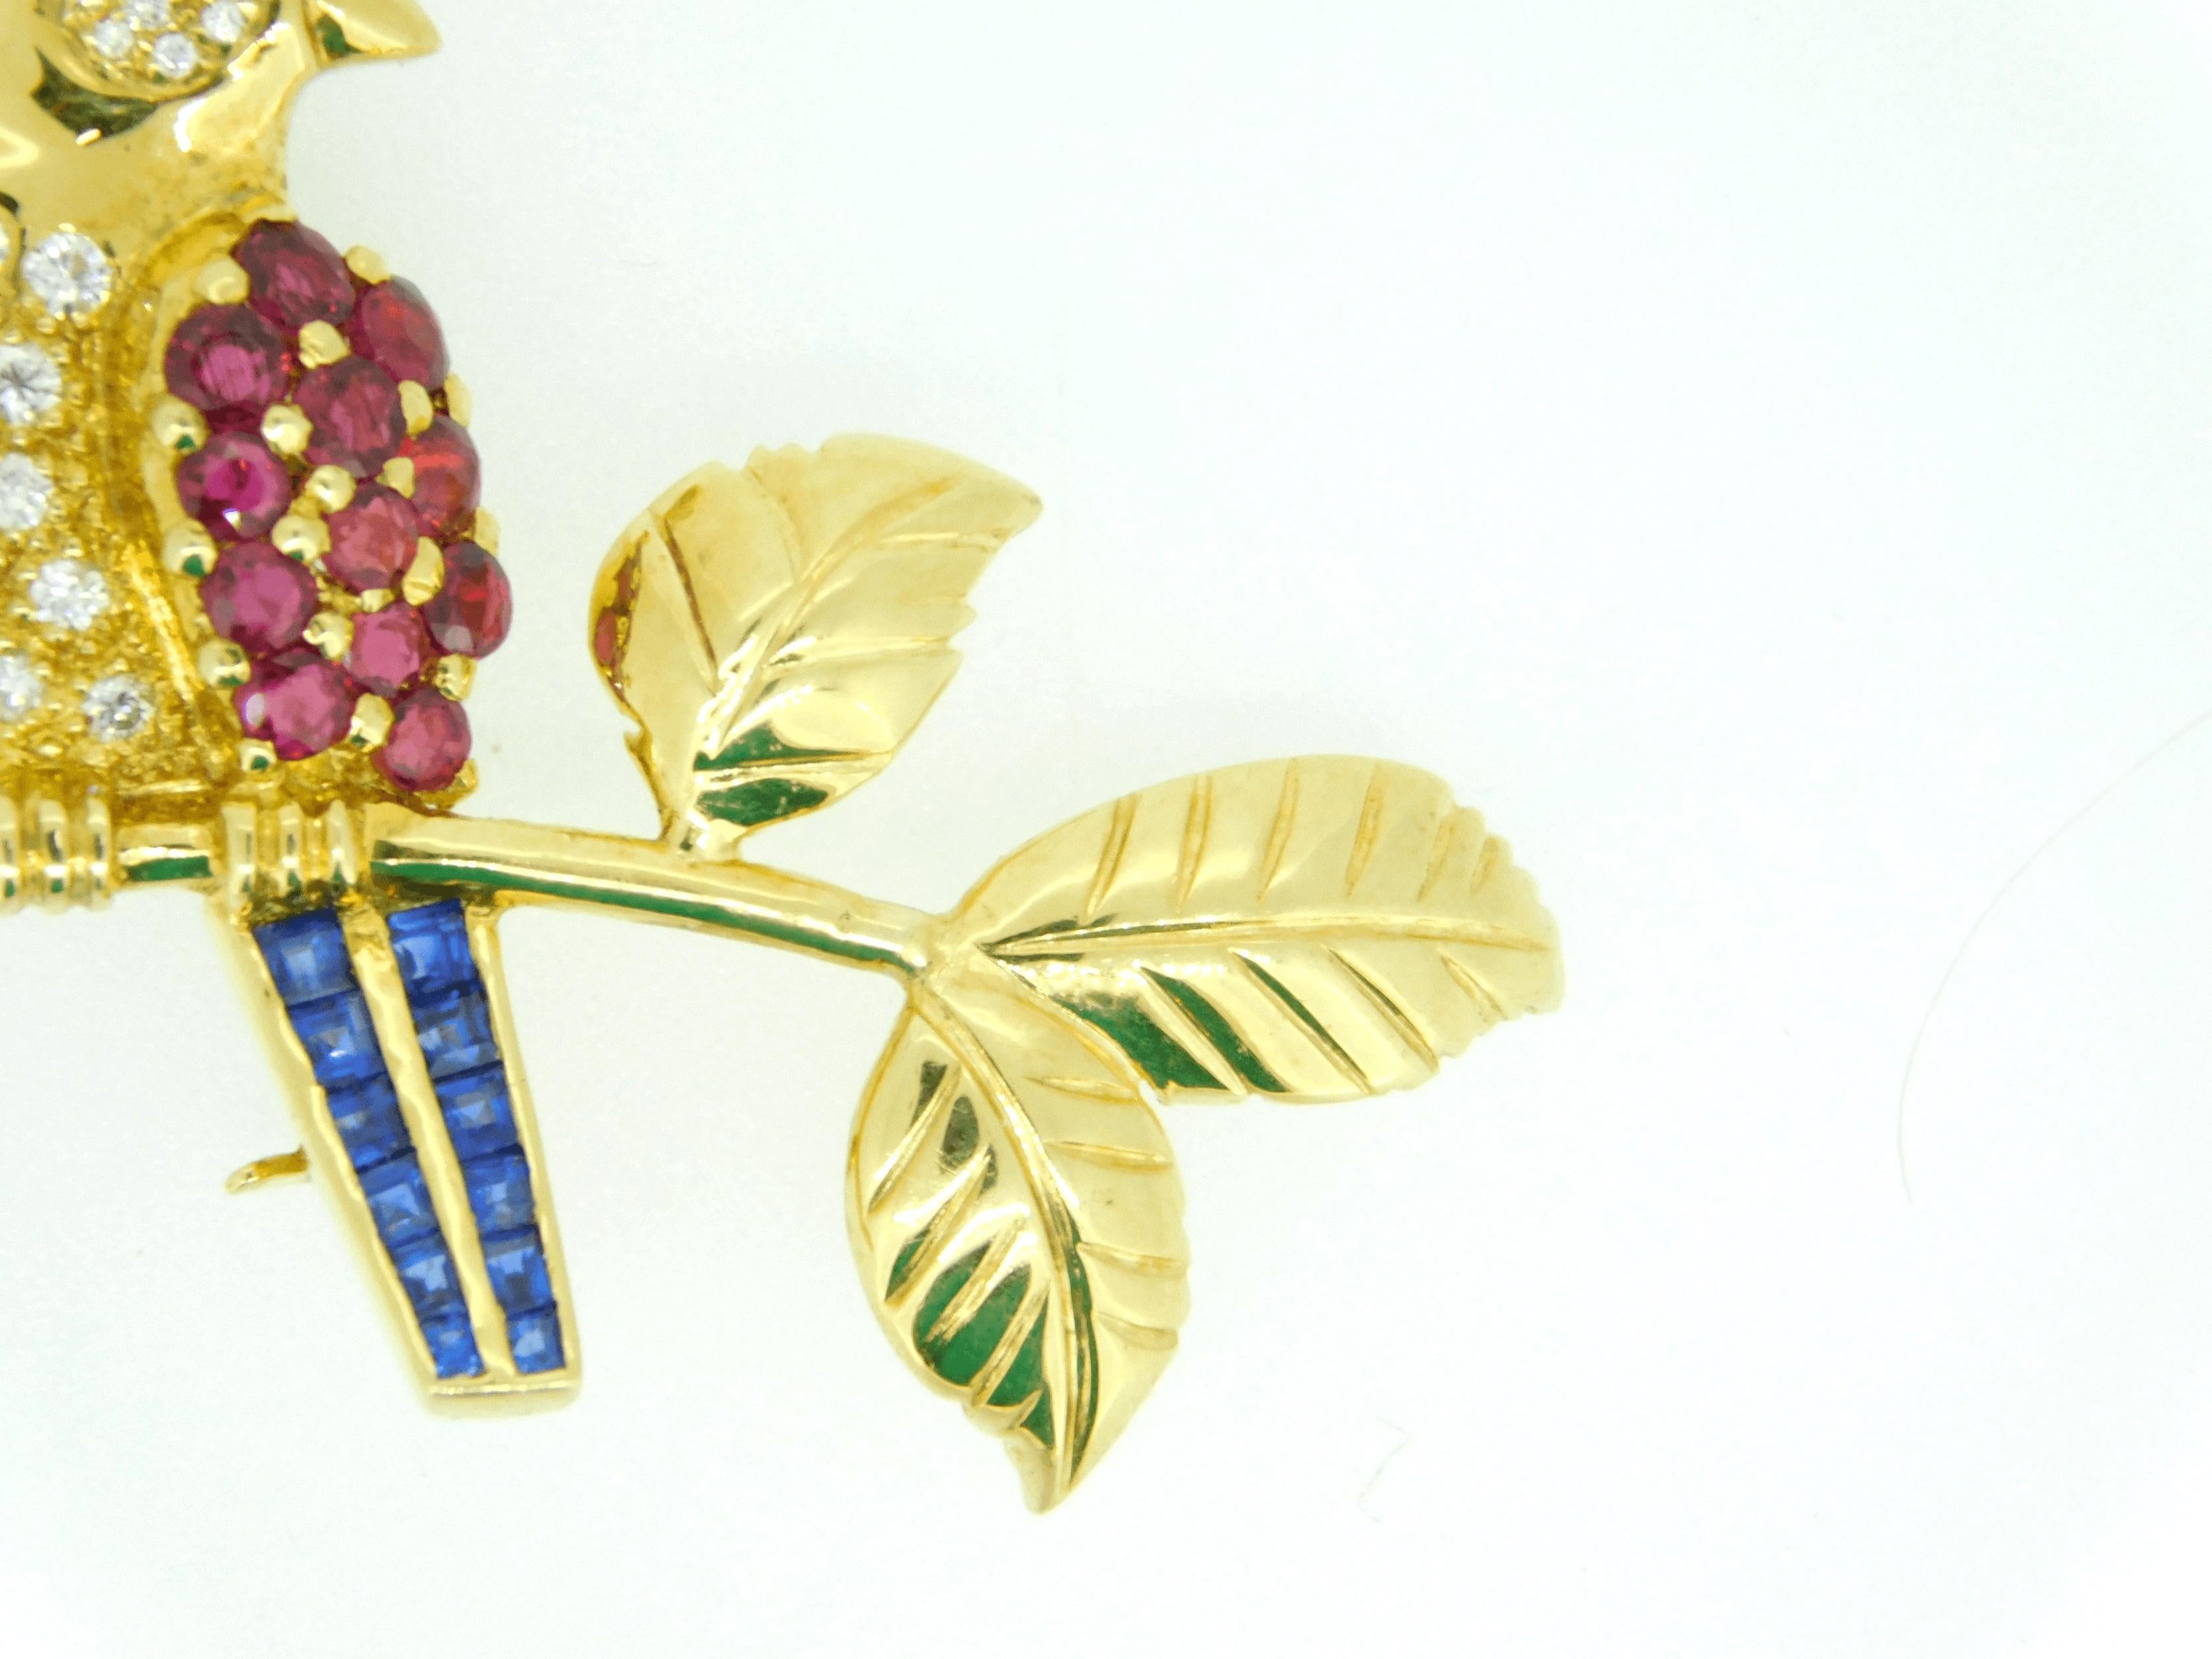 18k Gold Bird on Branch Pin w/ Genuine Natural Rubies Sapphires Diamonds #J4361

18k yellow gold brooch/pin in the form of a bird on a branch with leaves. The bird is set with diamonds, rubies, blue sapphires, and an emerald. 

There are eighteen